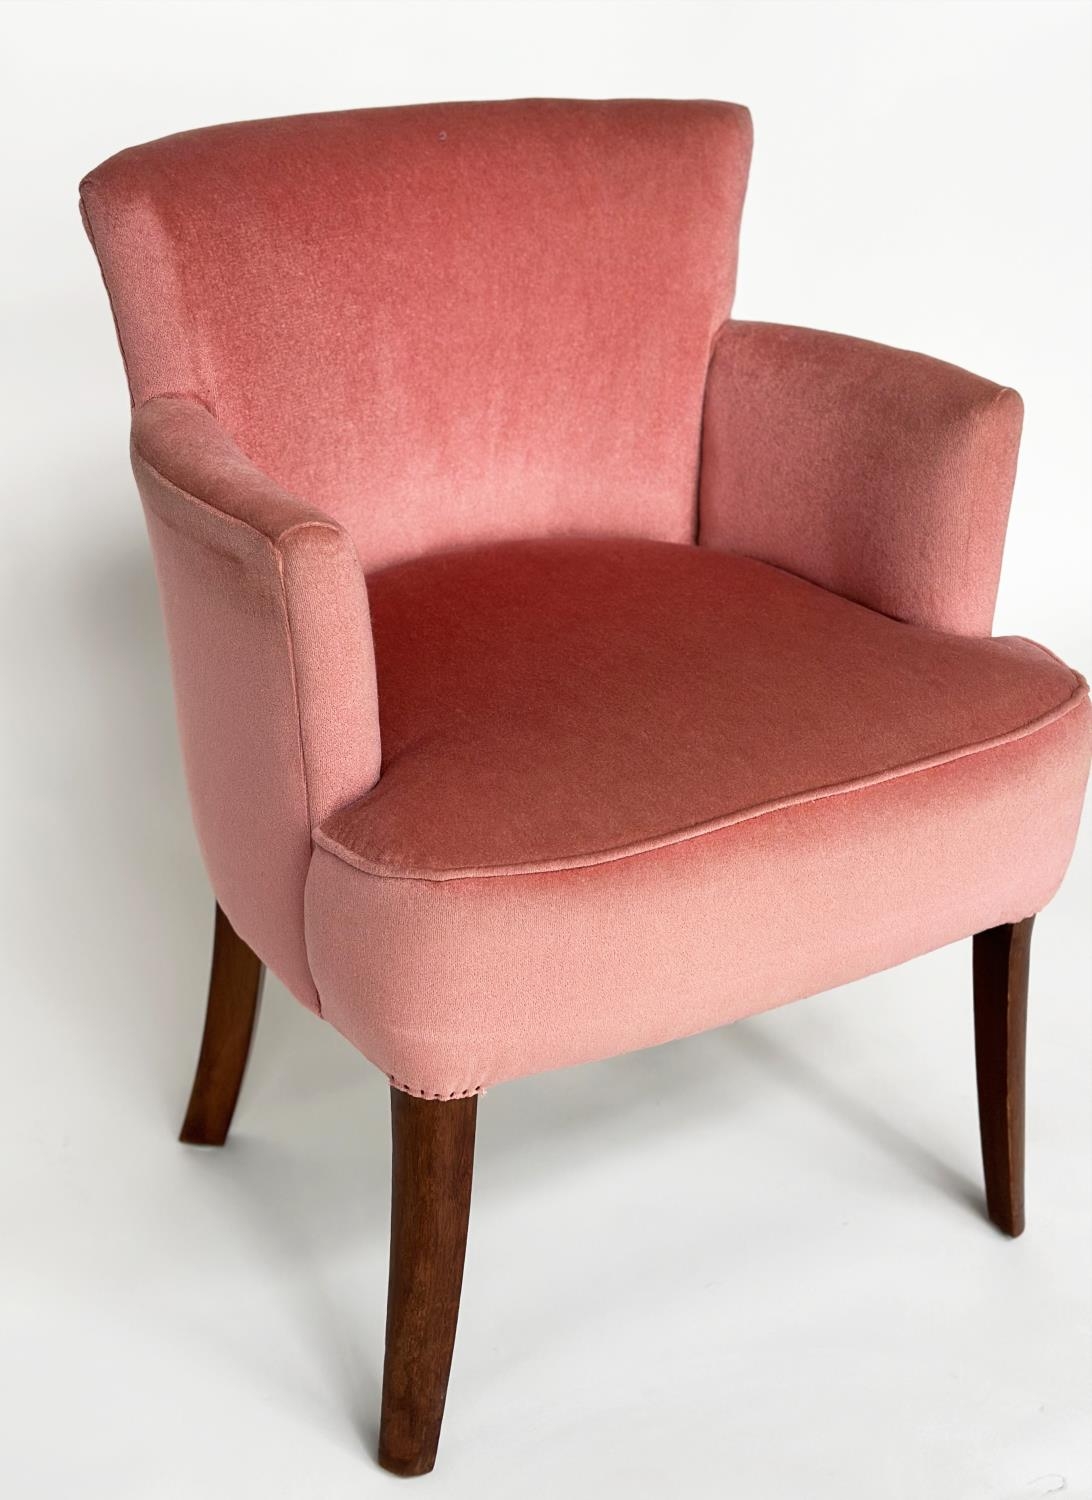 BRIDGE ARMCHAIR, mid 20th century rose velvet upholstered with tapering supports. - Image 6 of 6